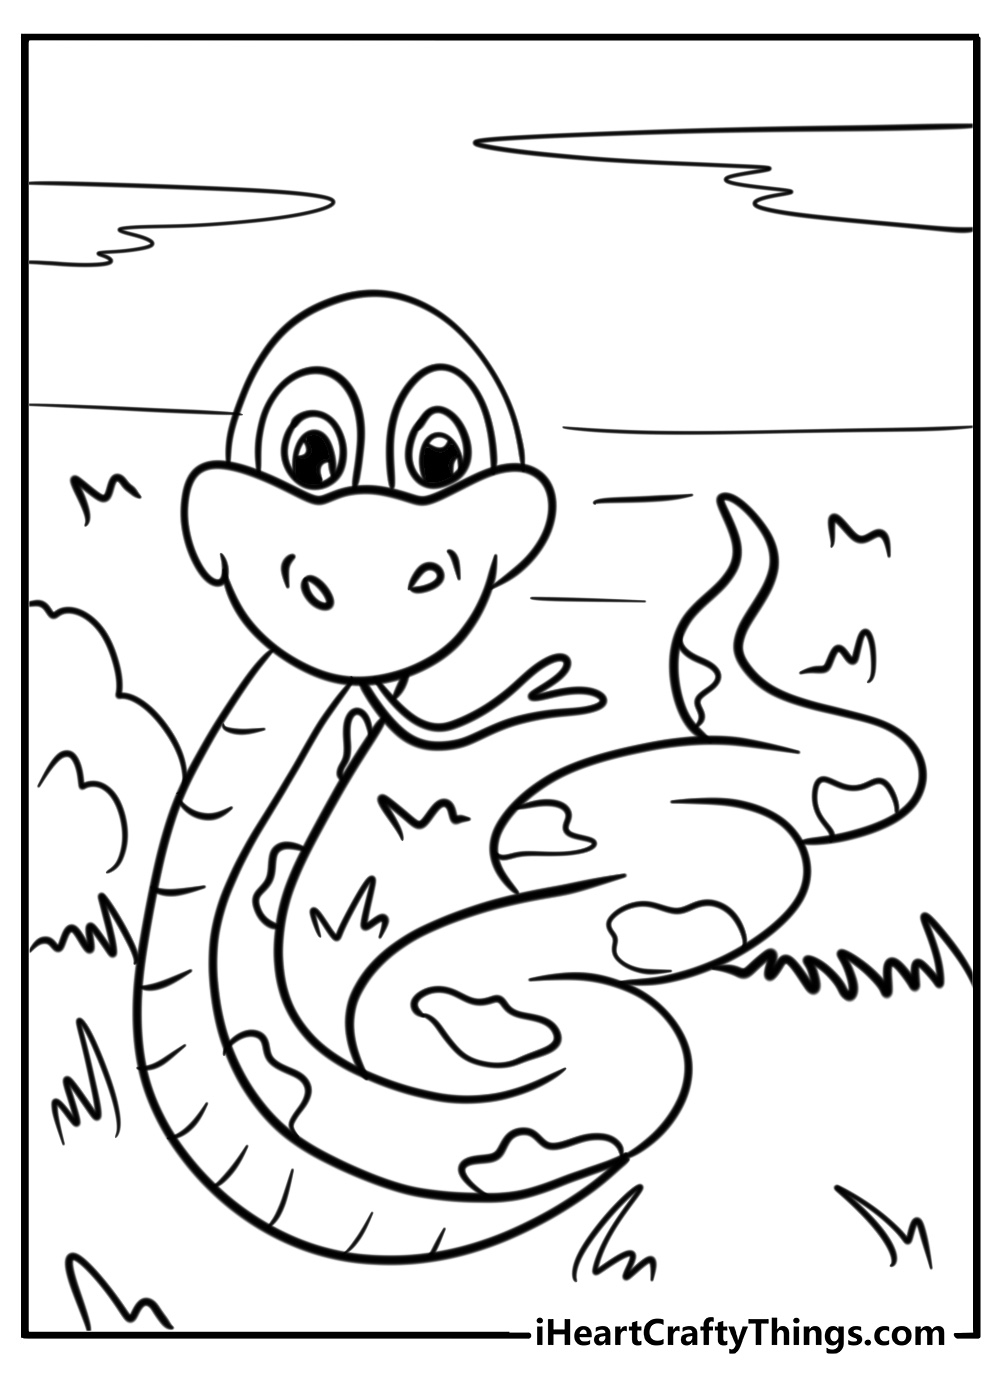 Cute animals coloring page of snake hissing outline